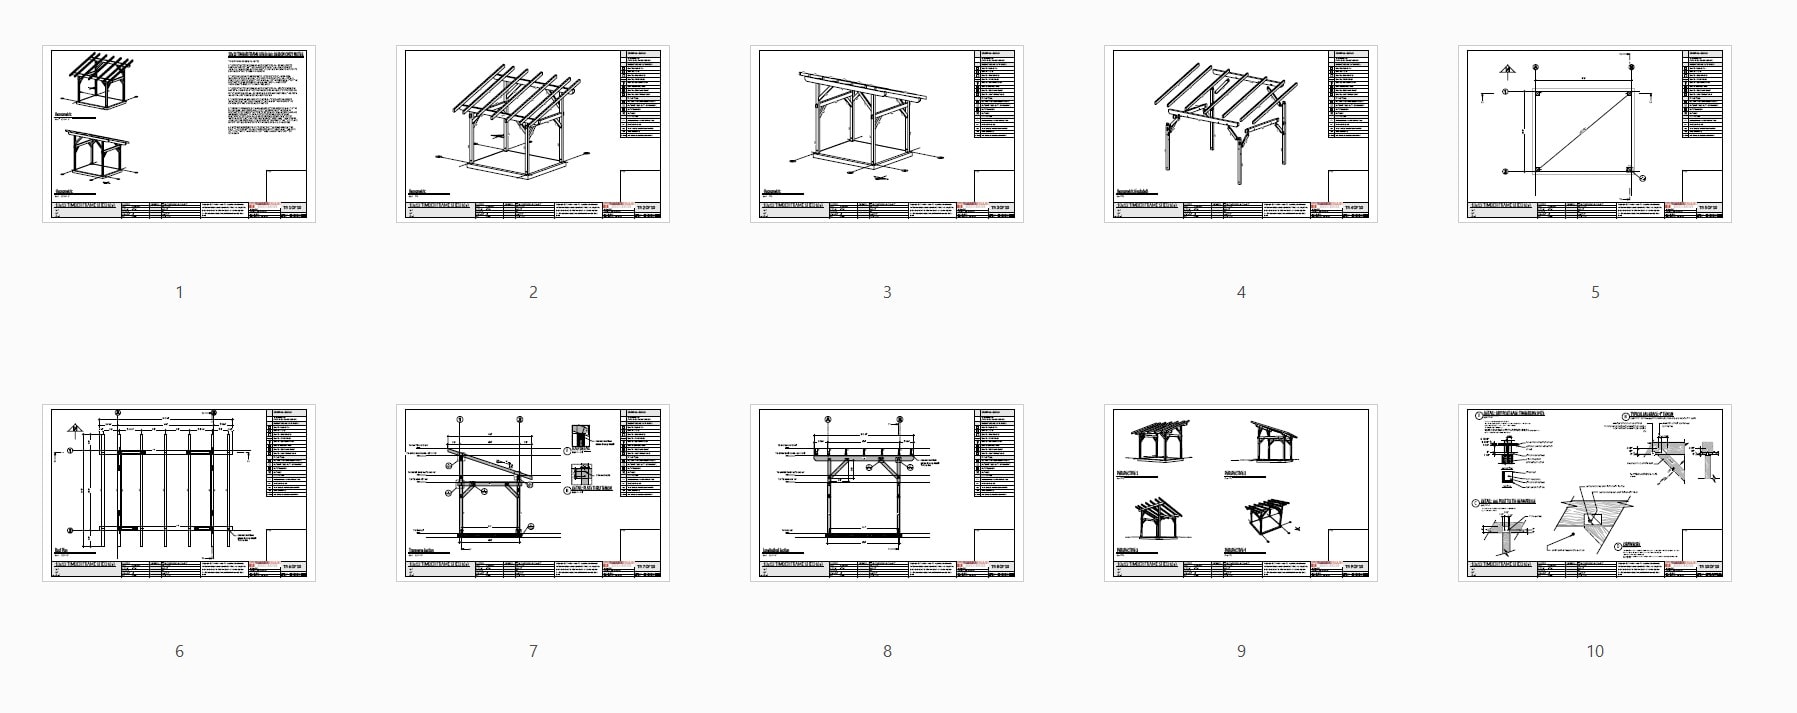 10x12 Shed Roof Plan - Plan Overview